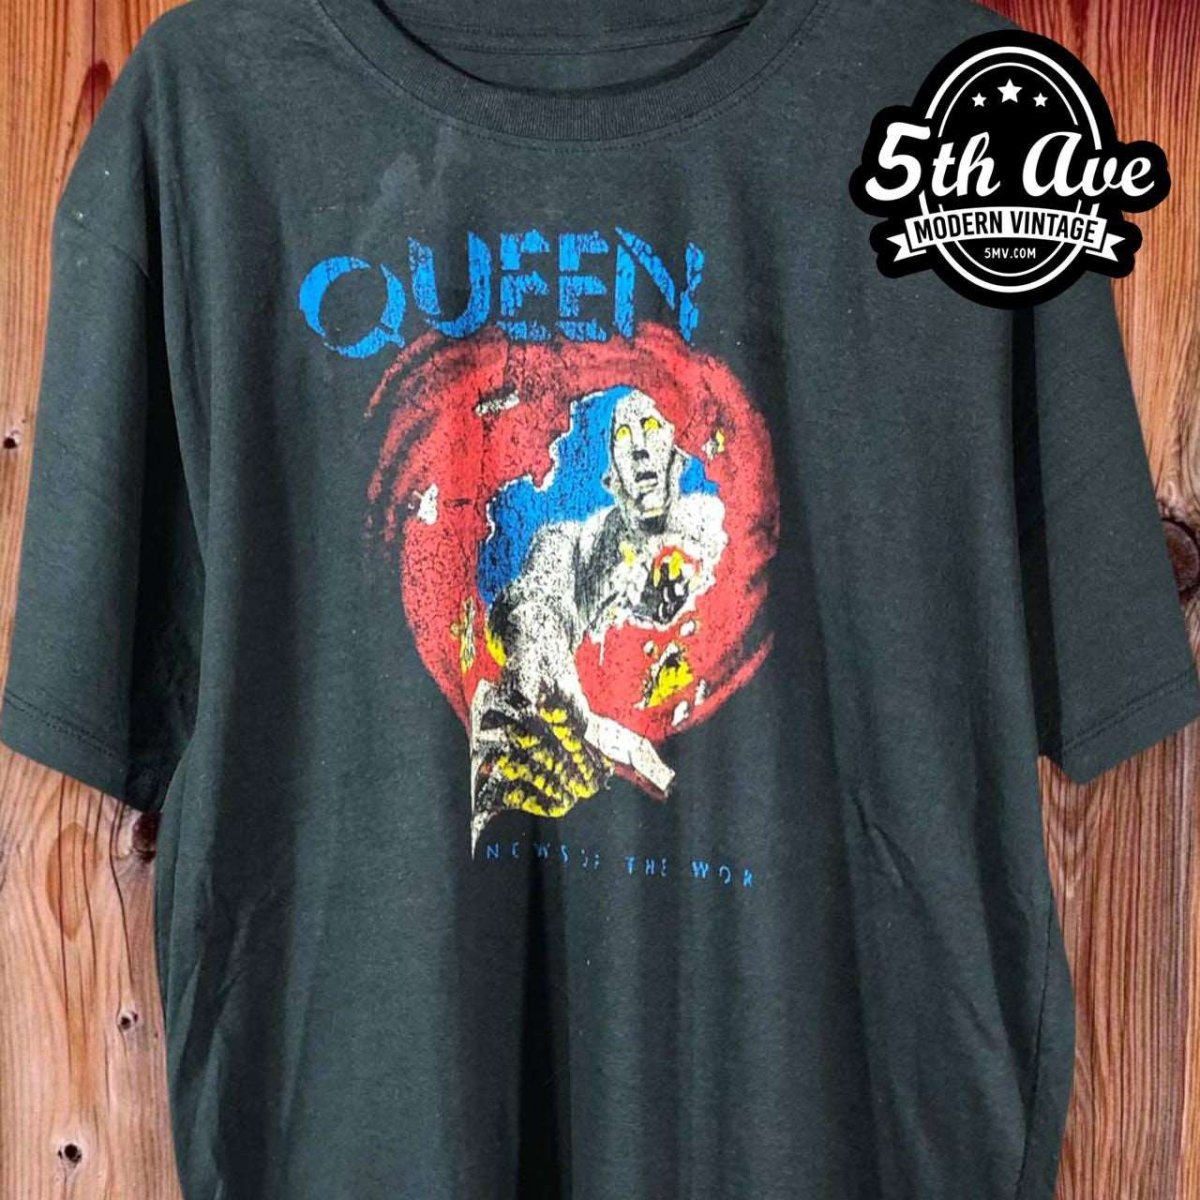 Queen 'News of The World' (Grey) Burnout T-Shirt (Large) 